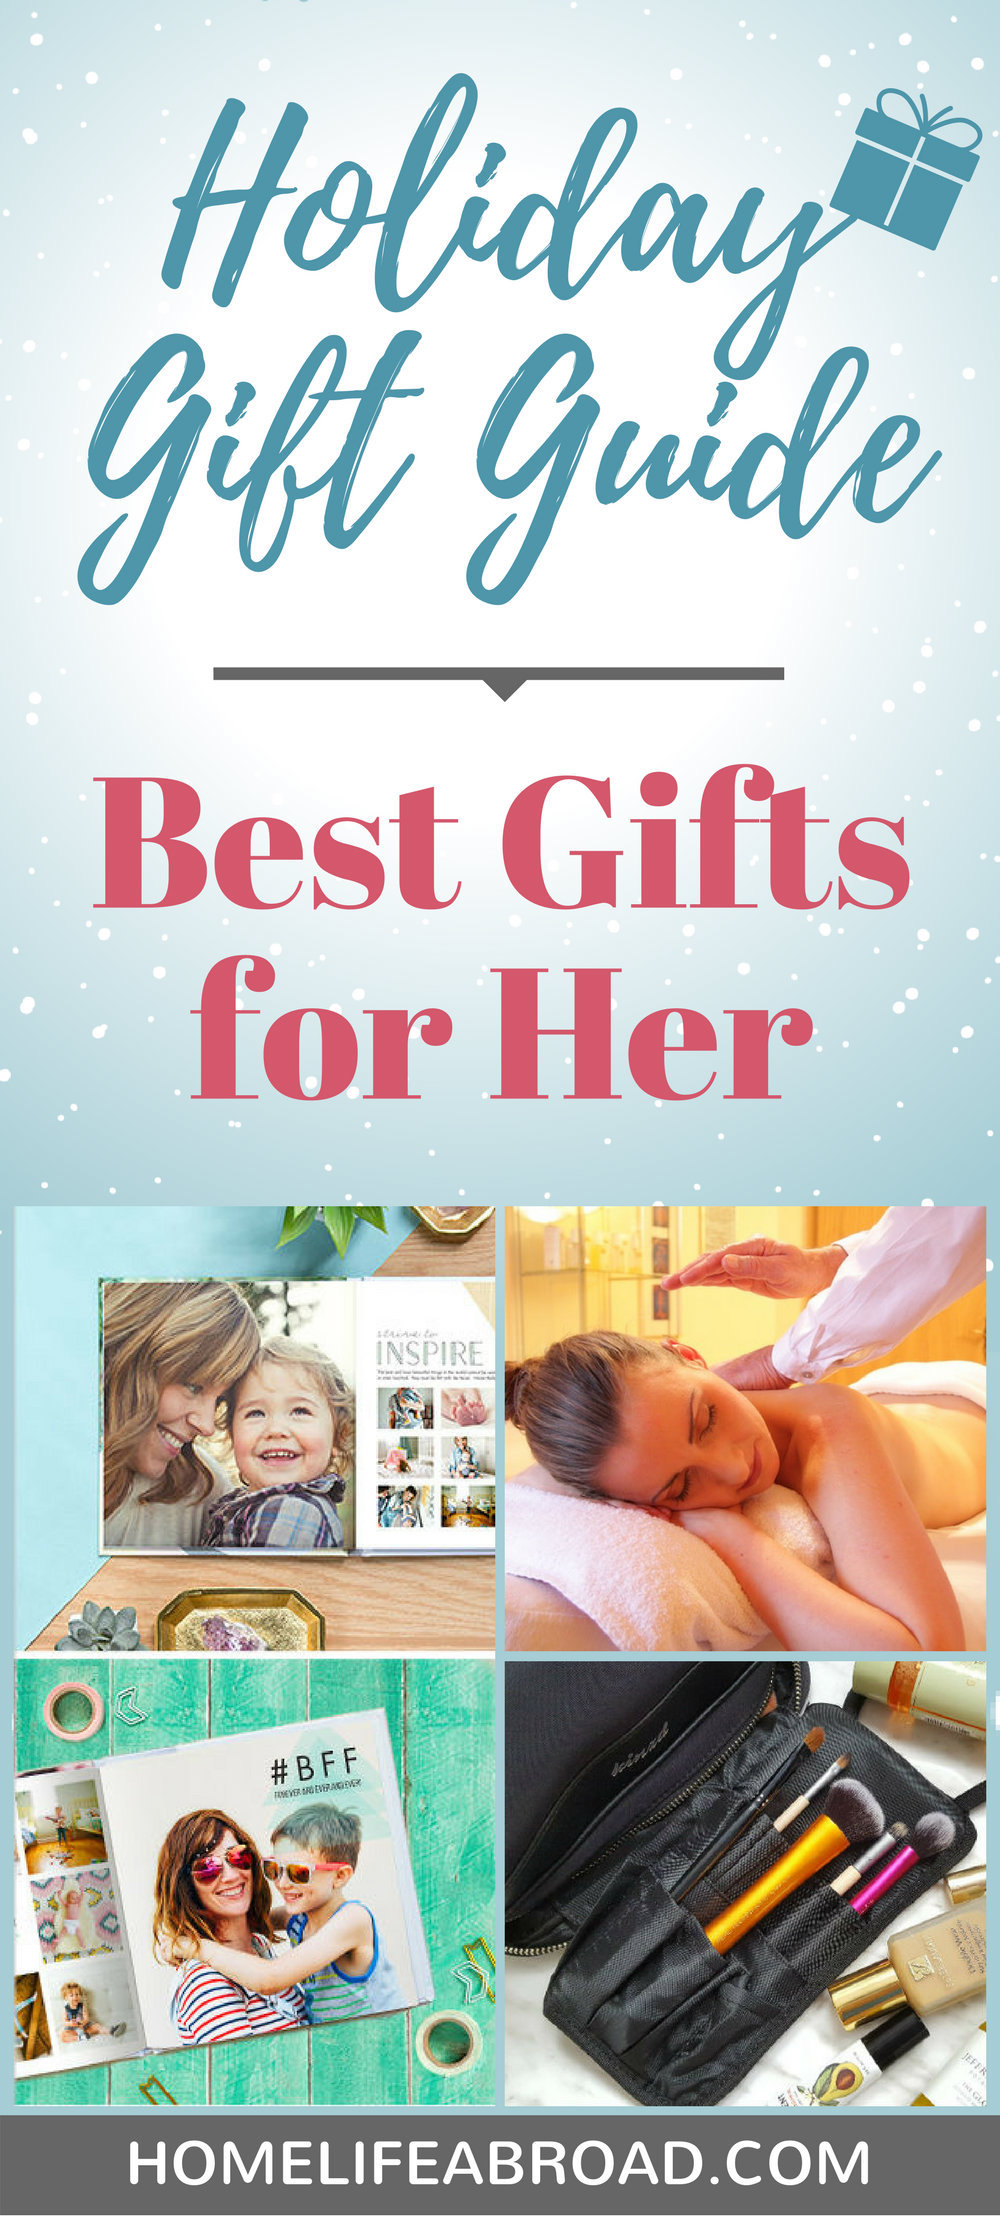 Looking for the perfect gift for a special lady in your life? Look no further - here are 5 great options to spoil any lucky woman! #holidaygiftguide #giftguide #giftsforher #giftsformom